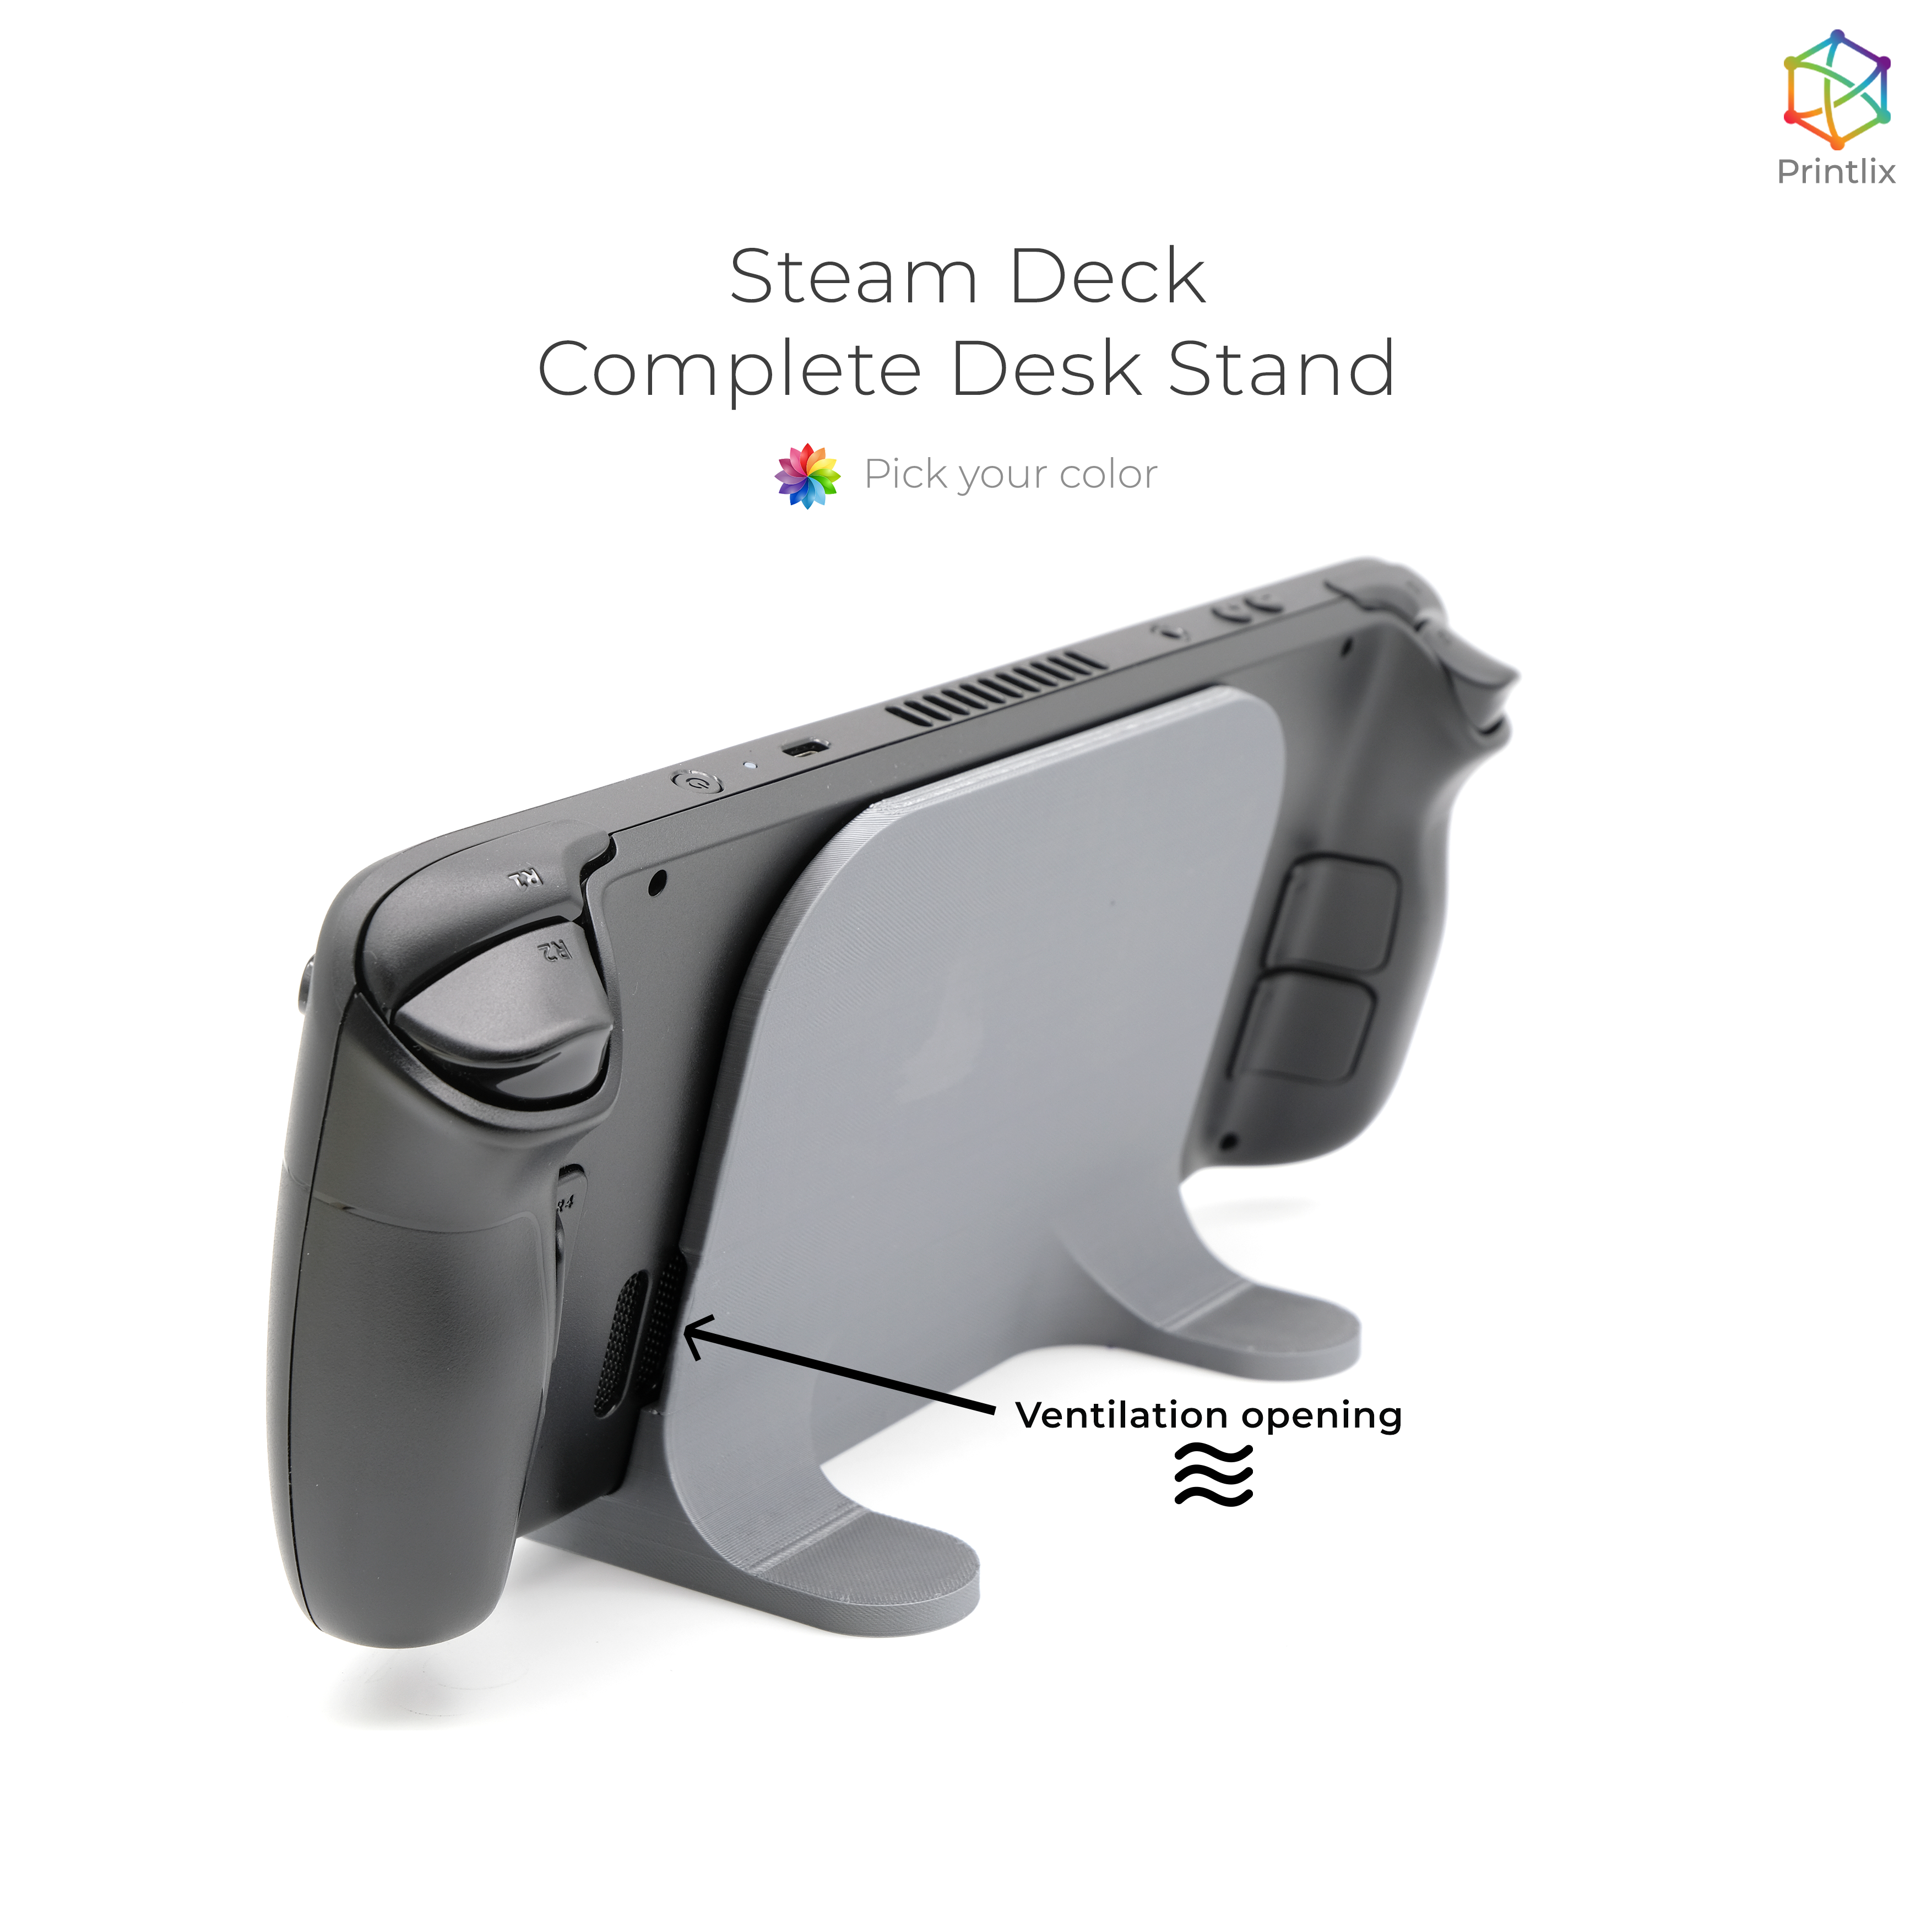 Steam Deck Dock - a Stand your Desk